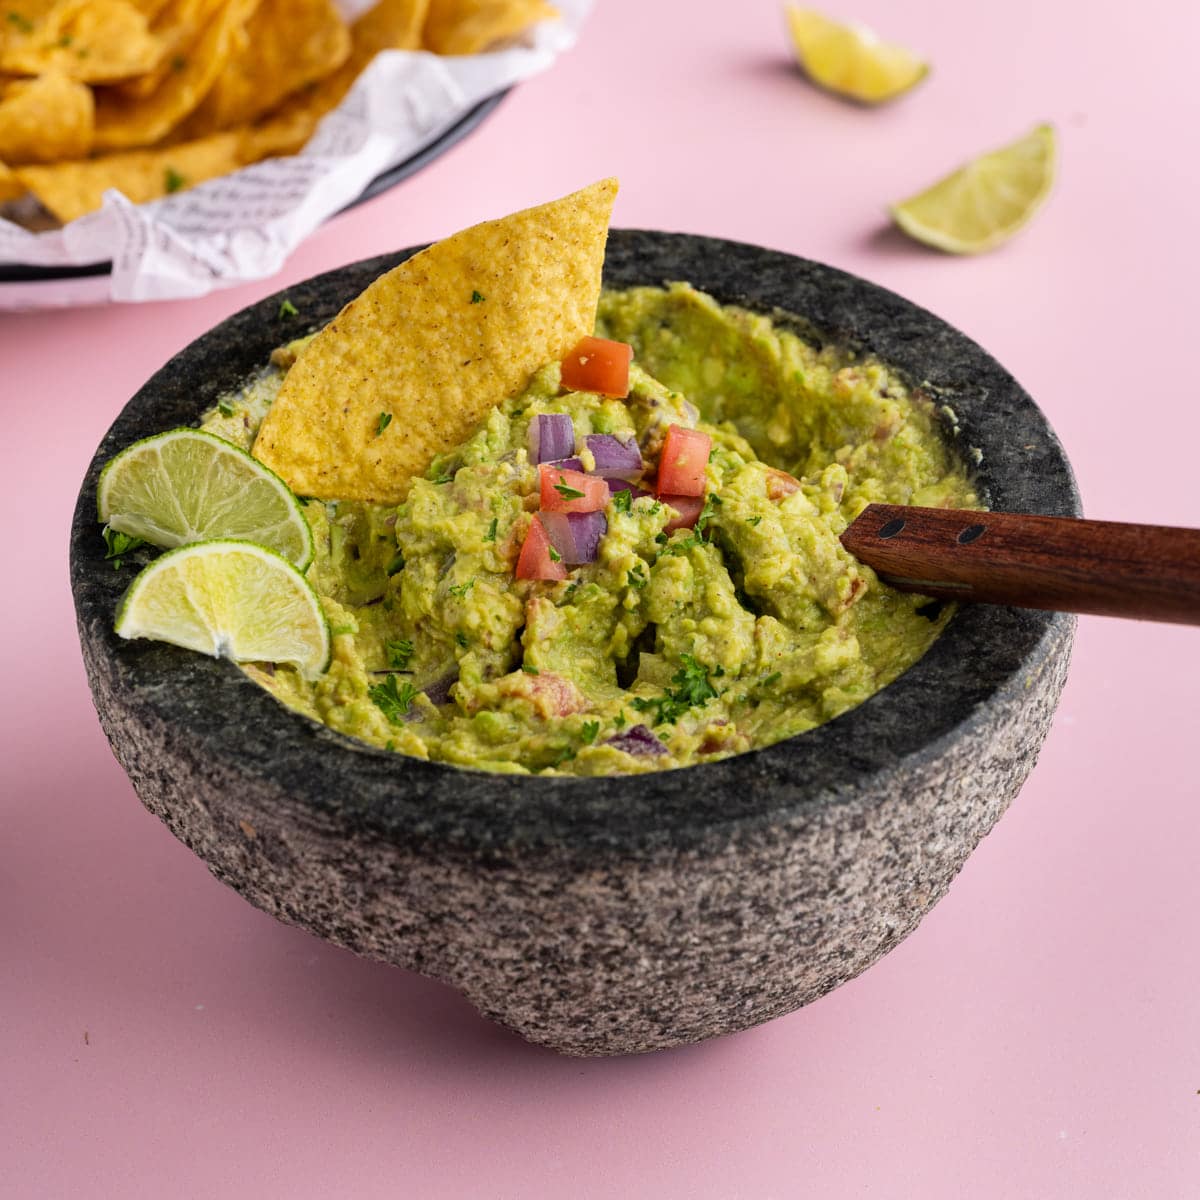 Homemade Tableside Guacamole in a mortar with a tortilla chip sticking out